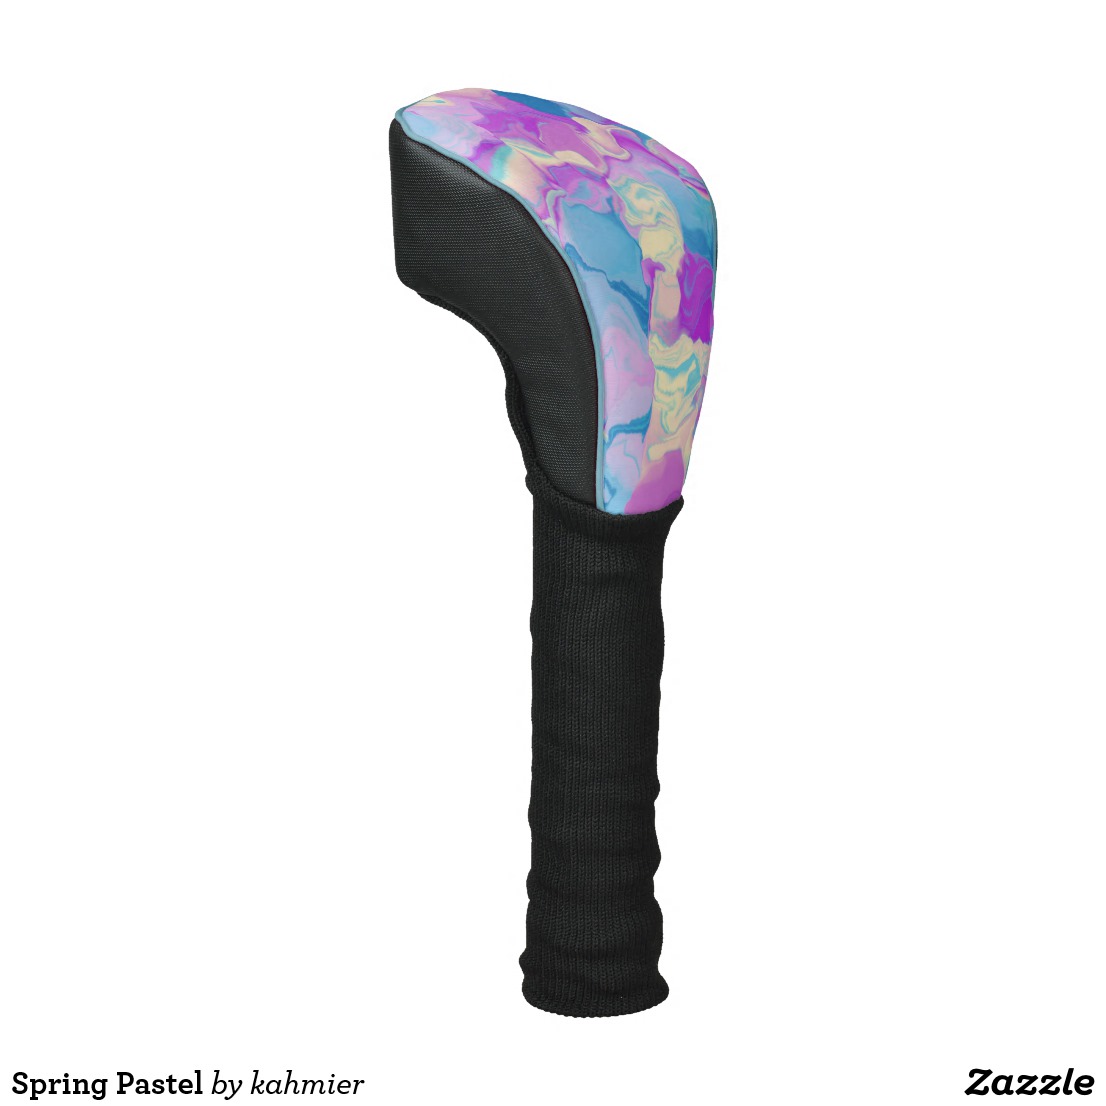 Spring Pastel Golf Head Cover